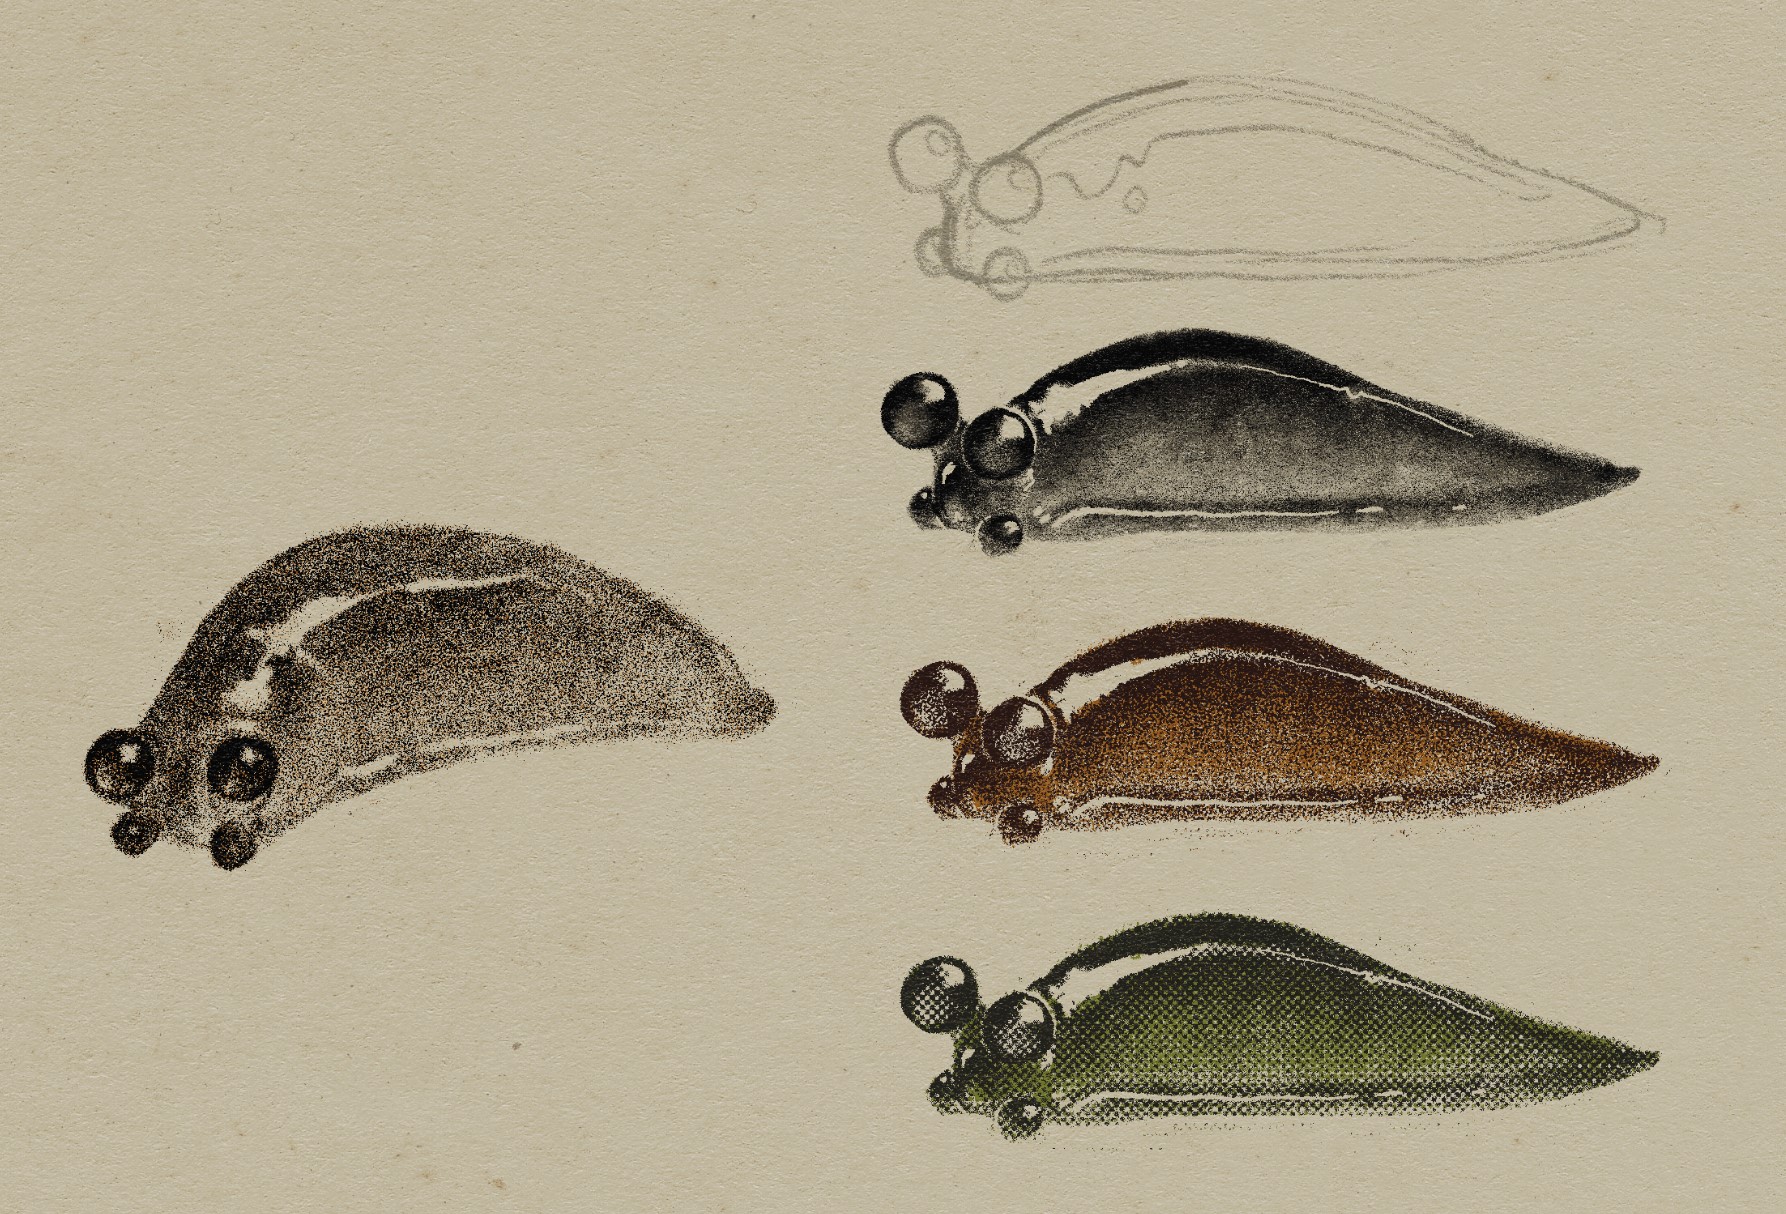 Illustration of several baby slugs. The lone one on the left is sightly facing the viewer. The others on the right are all the same but rendered in different textures and colors.